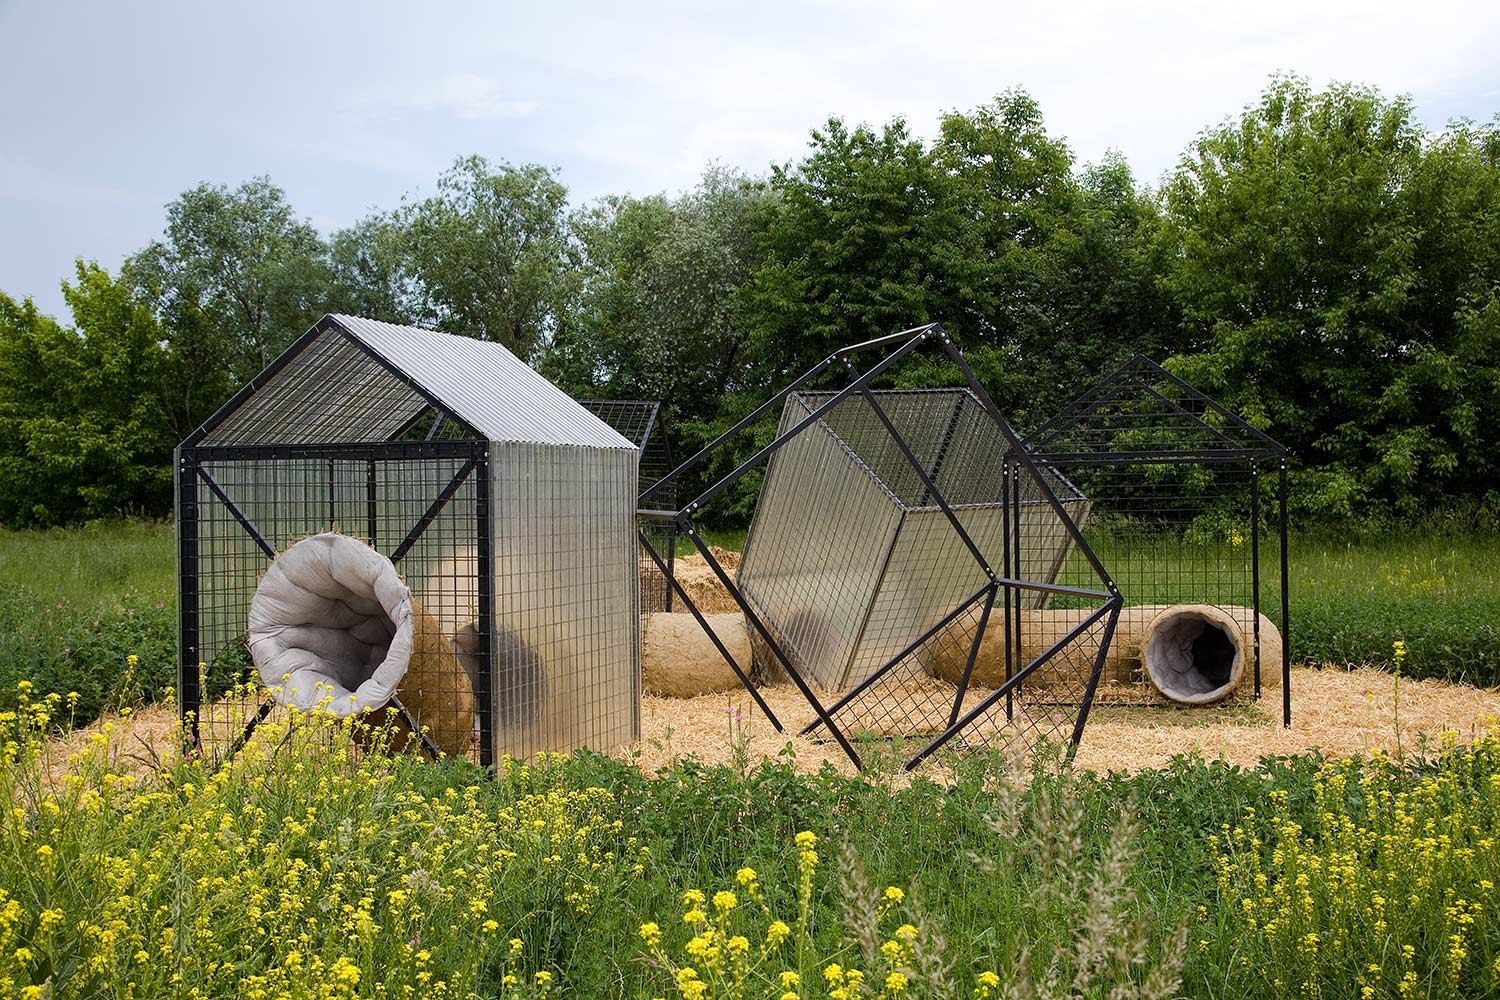 In this installation several huts made of steel connected with wormholes made of clay stand in a grassfield